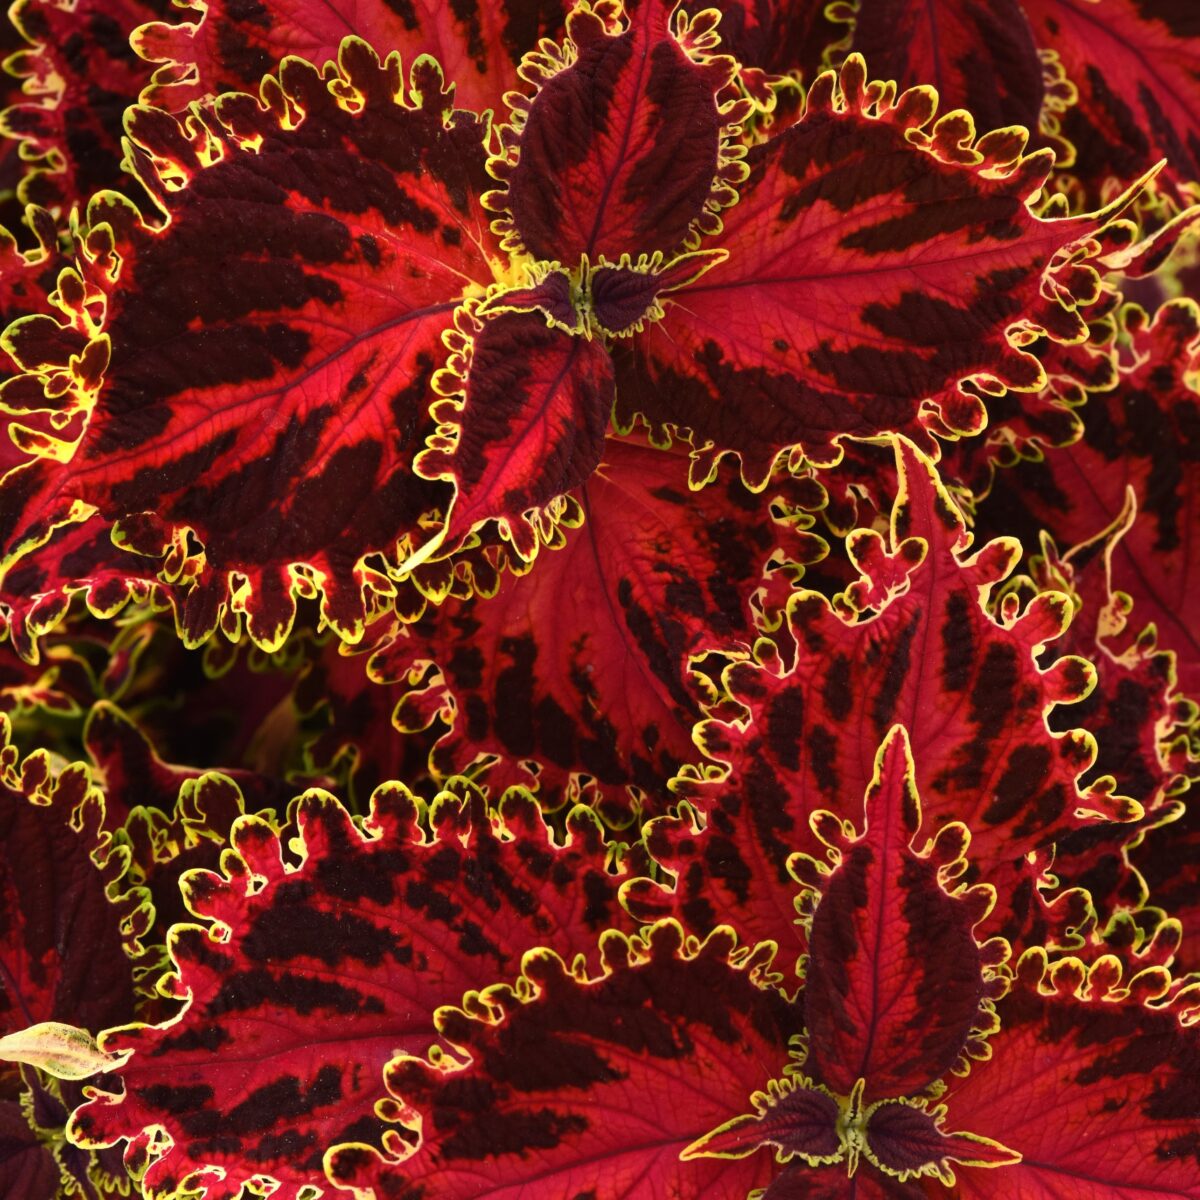 Vivid Solar Flare Coleus leaves glowing with fiery red and yellow hues